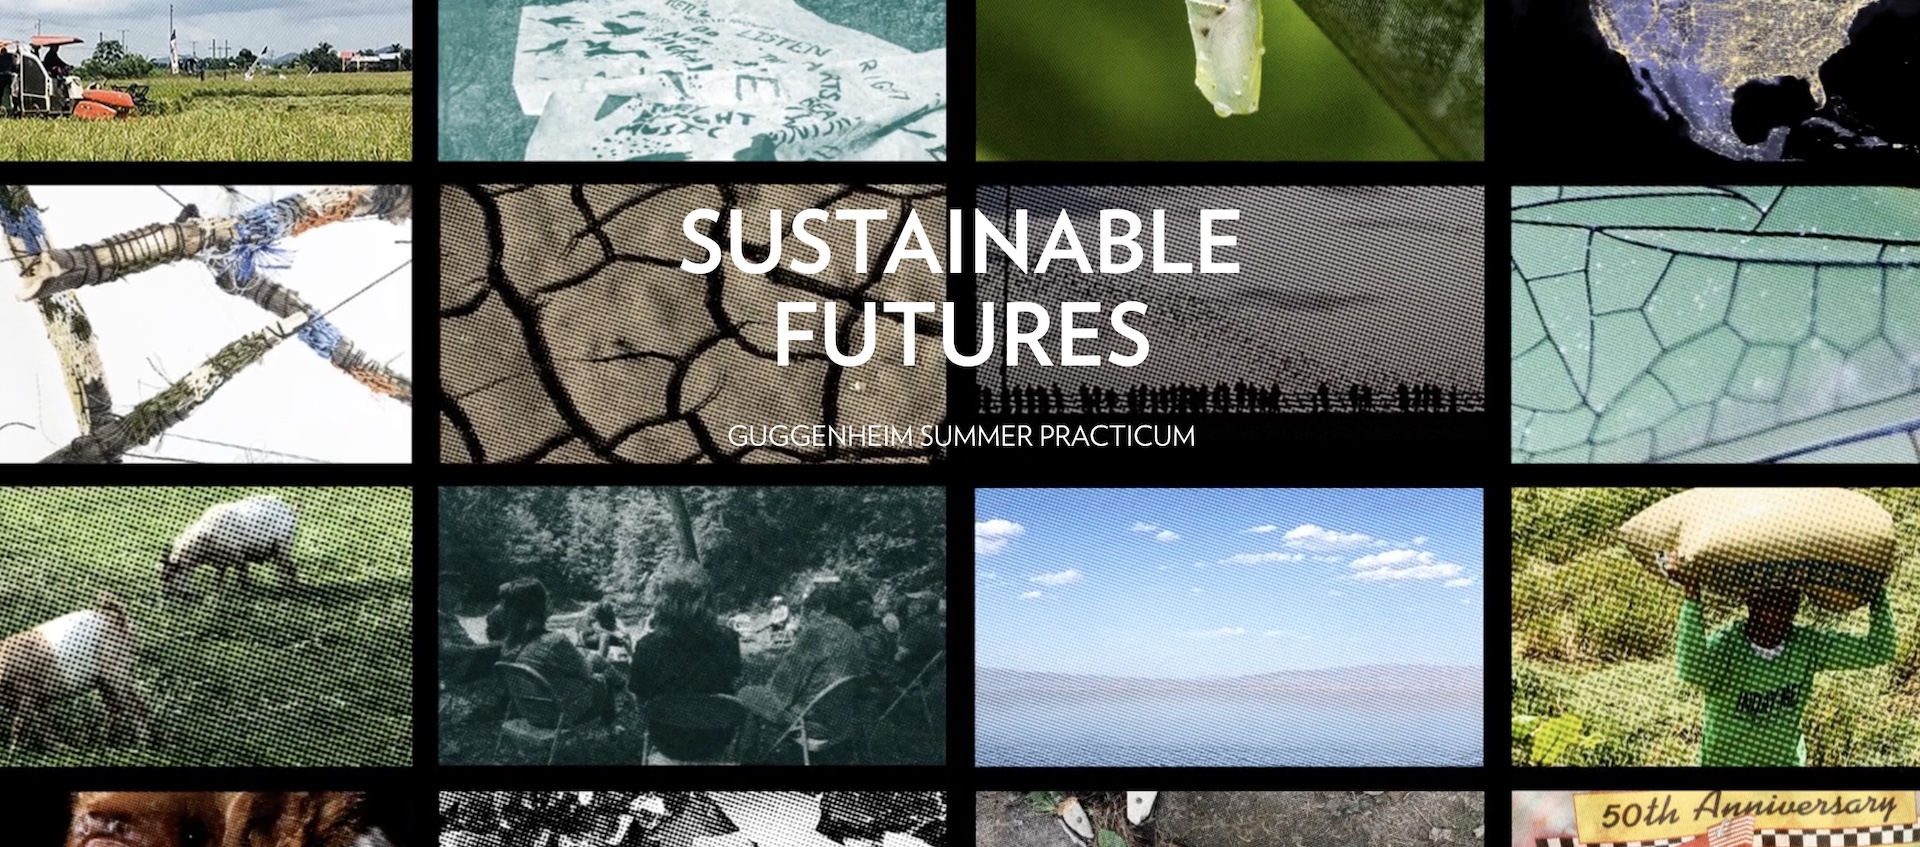 Home page image for the Guggenheim Summer Practicum project Sustainable Futures